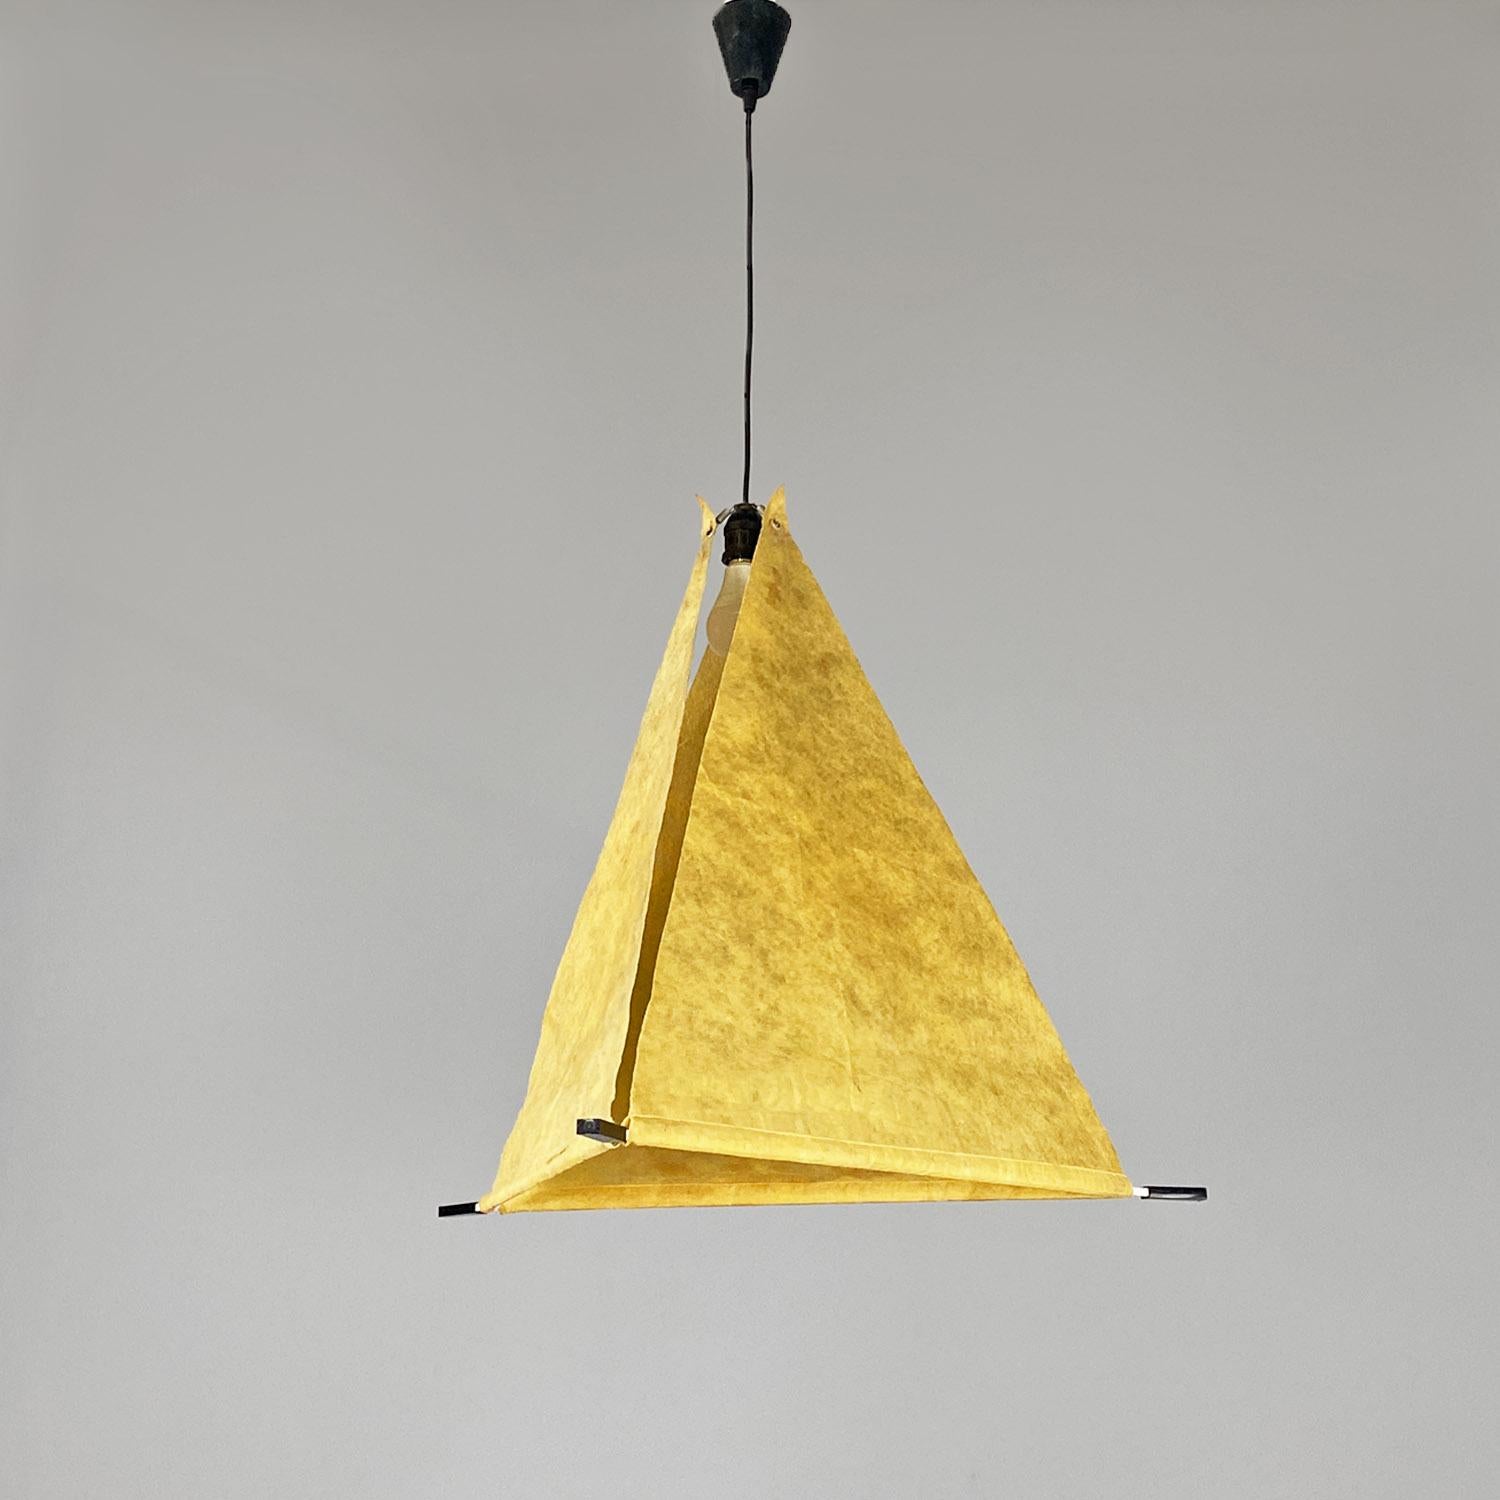 Italian Mid-Century Modern pyramid metal and parchment chandelier, 1960s
Chandelier with a pyramid-shaped lampshade structure, in which each side is a sheet of parchment attached to a white metal structure with black terminals at the corners, to the